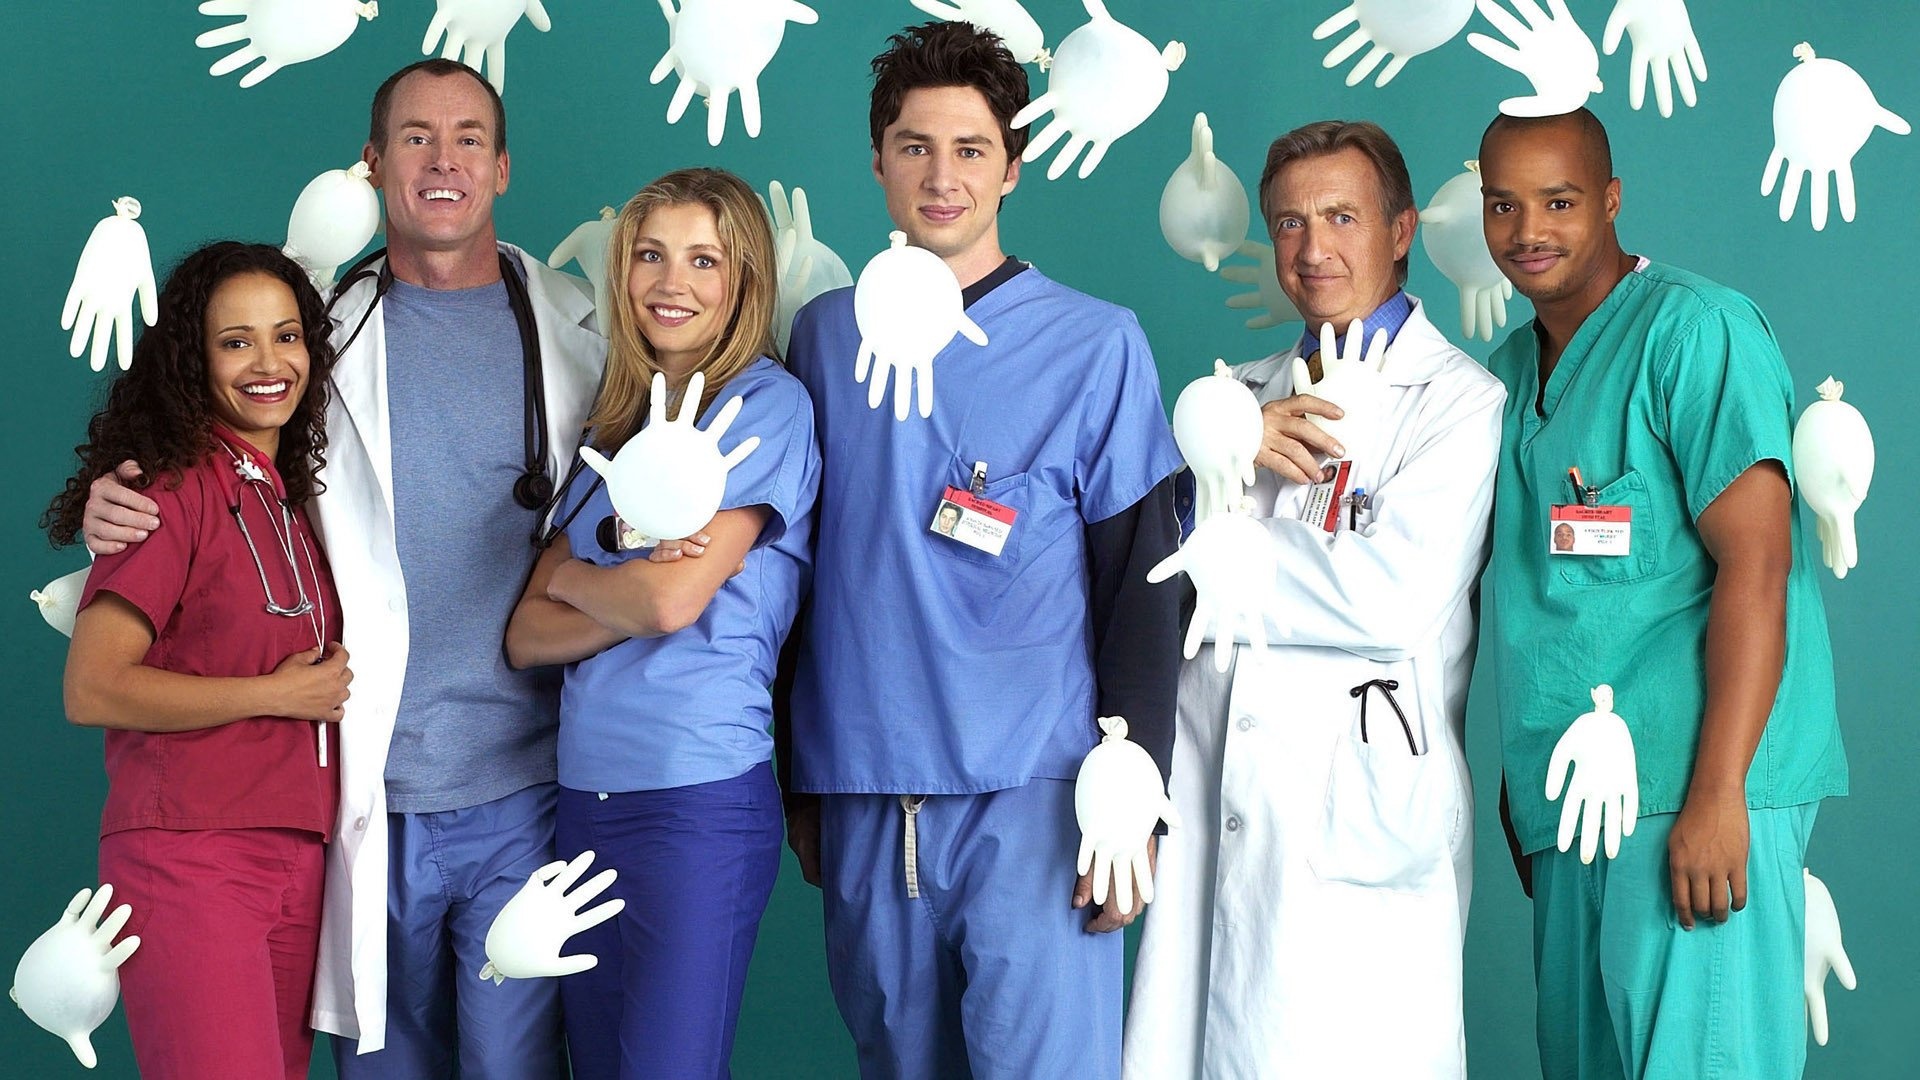 Donald Faison: Scrubs, TV show produced by the television production division of Walt Disney Television. 1920x1080 Full HD Wallpaper.